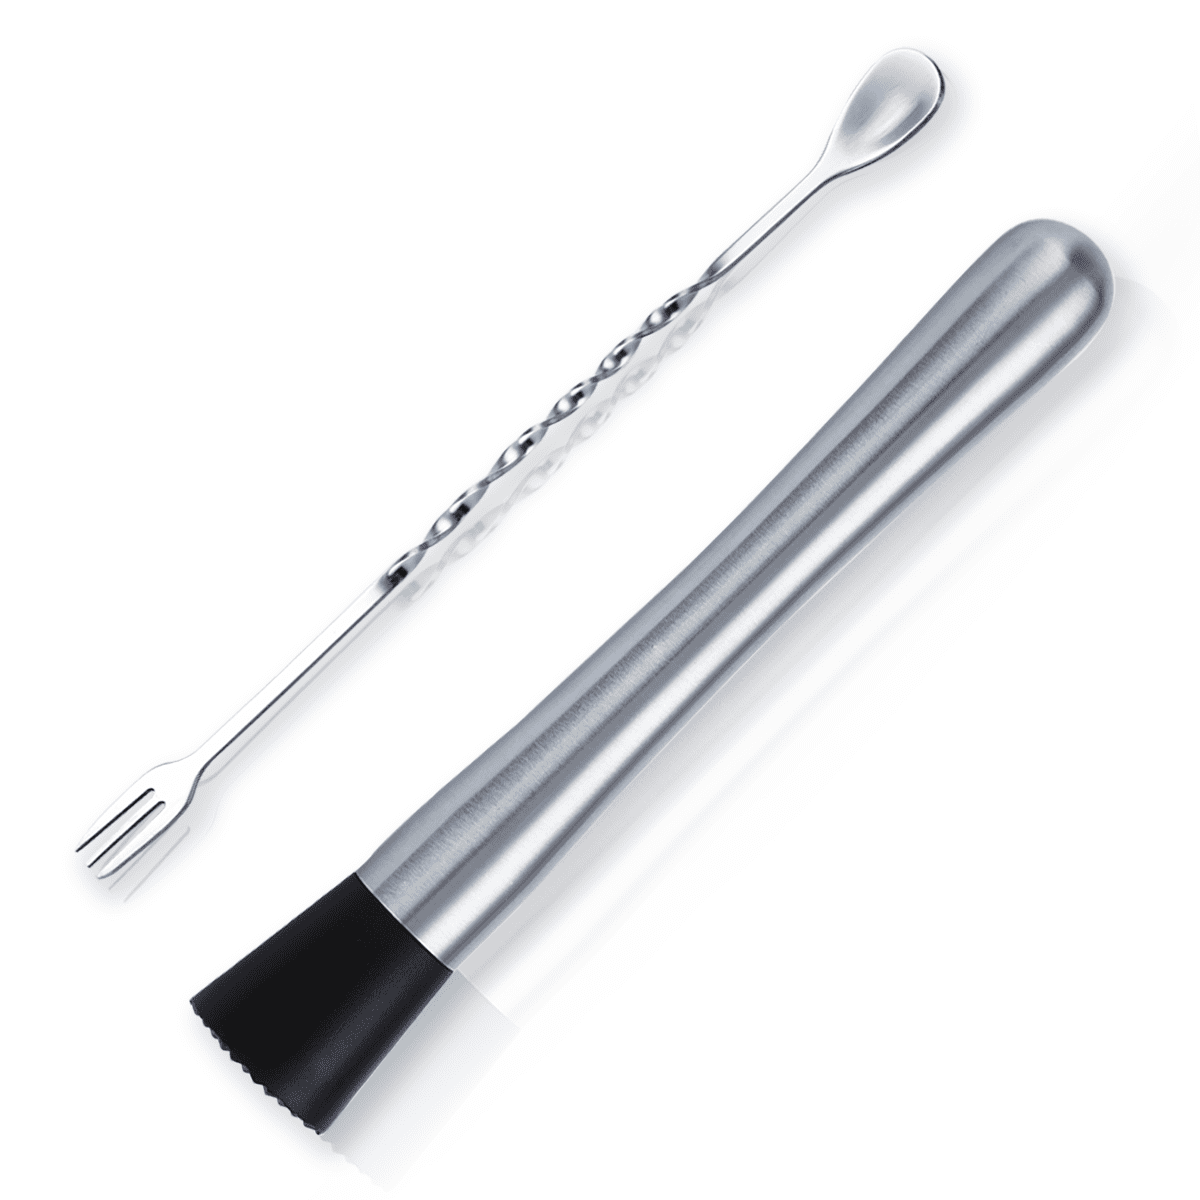 Doyime Stainless Steel Cocktail Muddler Swizzle Stick by Doyime 